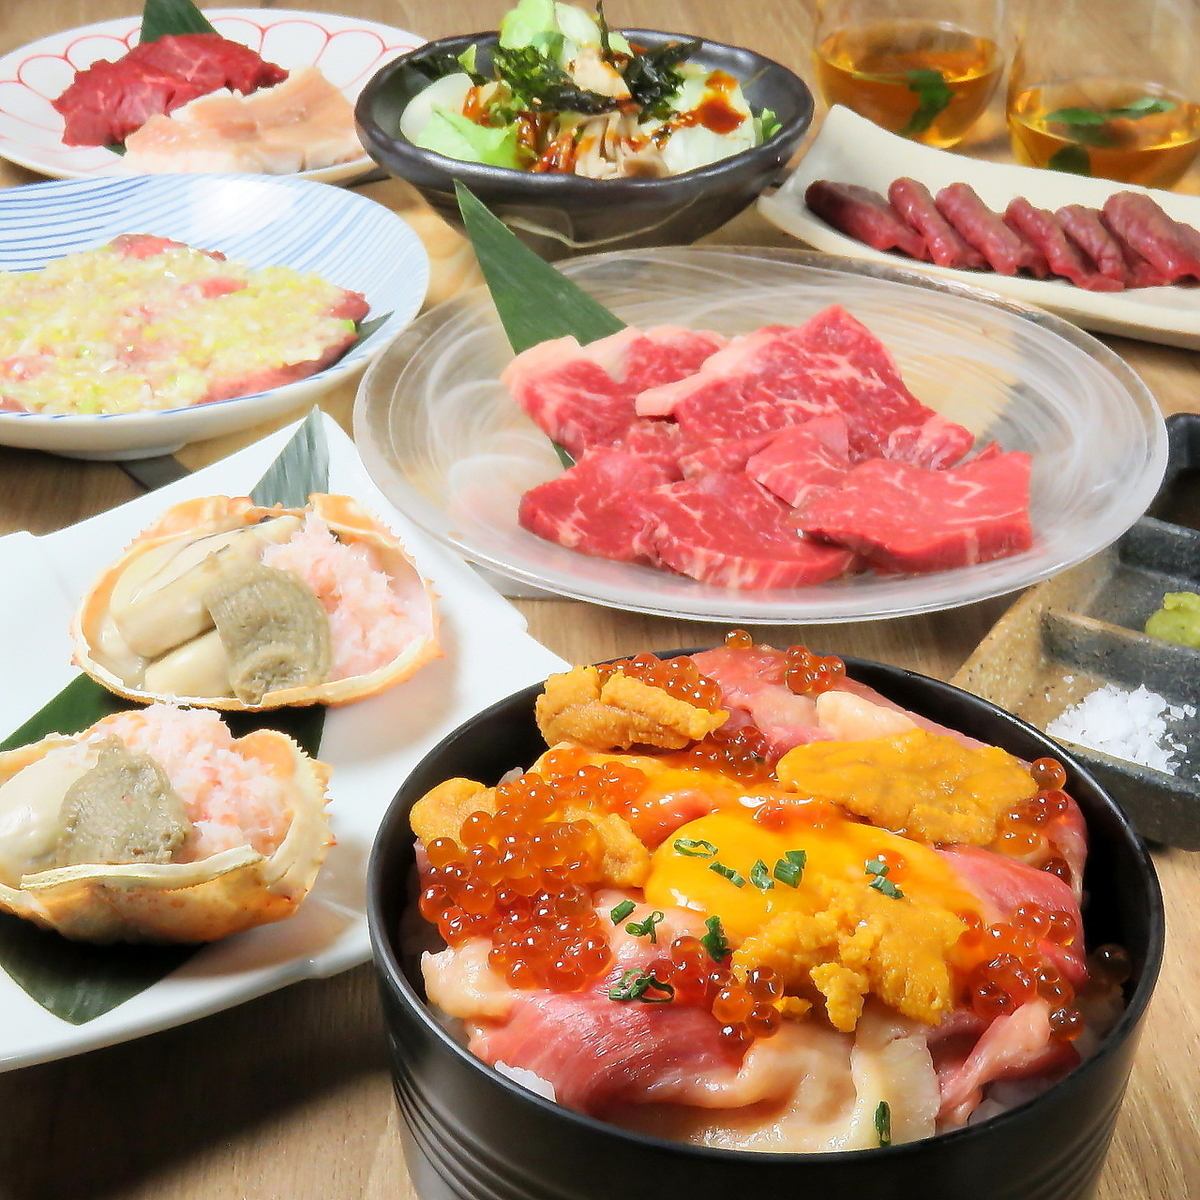 13 luxurious dishes including wagyu beef, sea urchin, crab, oyster, salmon roe, etc. + 2 hours all-you-can-drink 8,000 yen